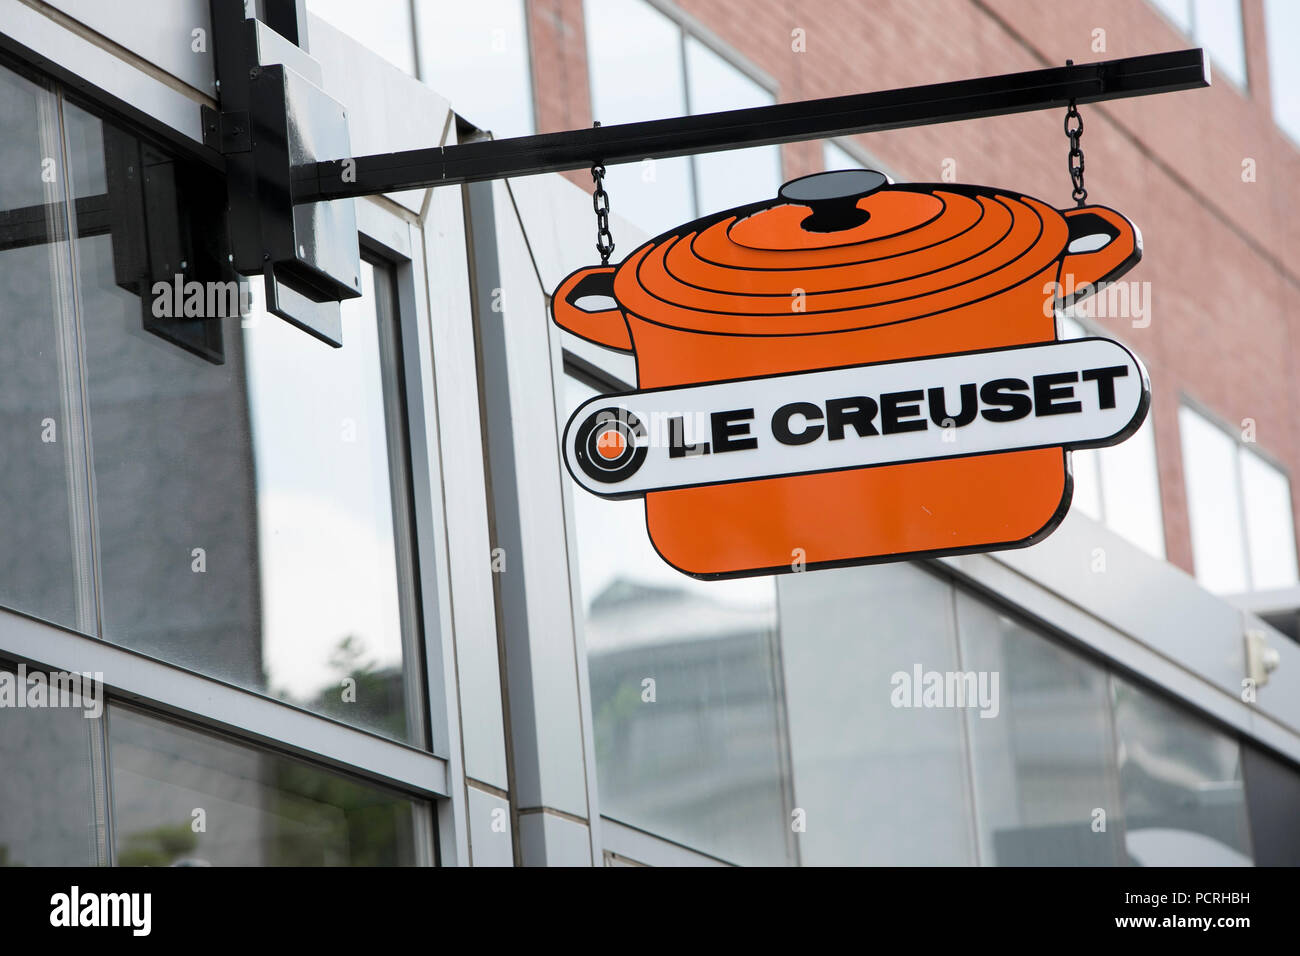 https://c8.alamy.com/comp/PCRHBH/a-logo-sign-outside-of-a-le-creuset-retail-store-location-in-denver-colorado-on-july-23-2018-PCRHBH.jpg